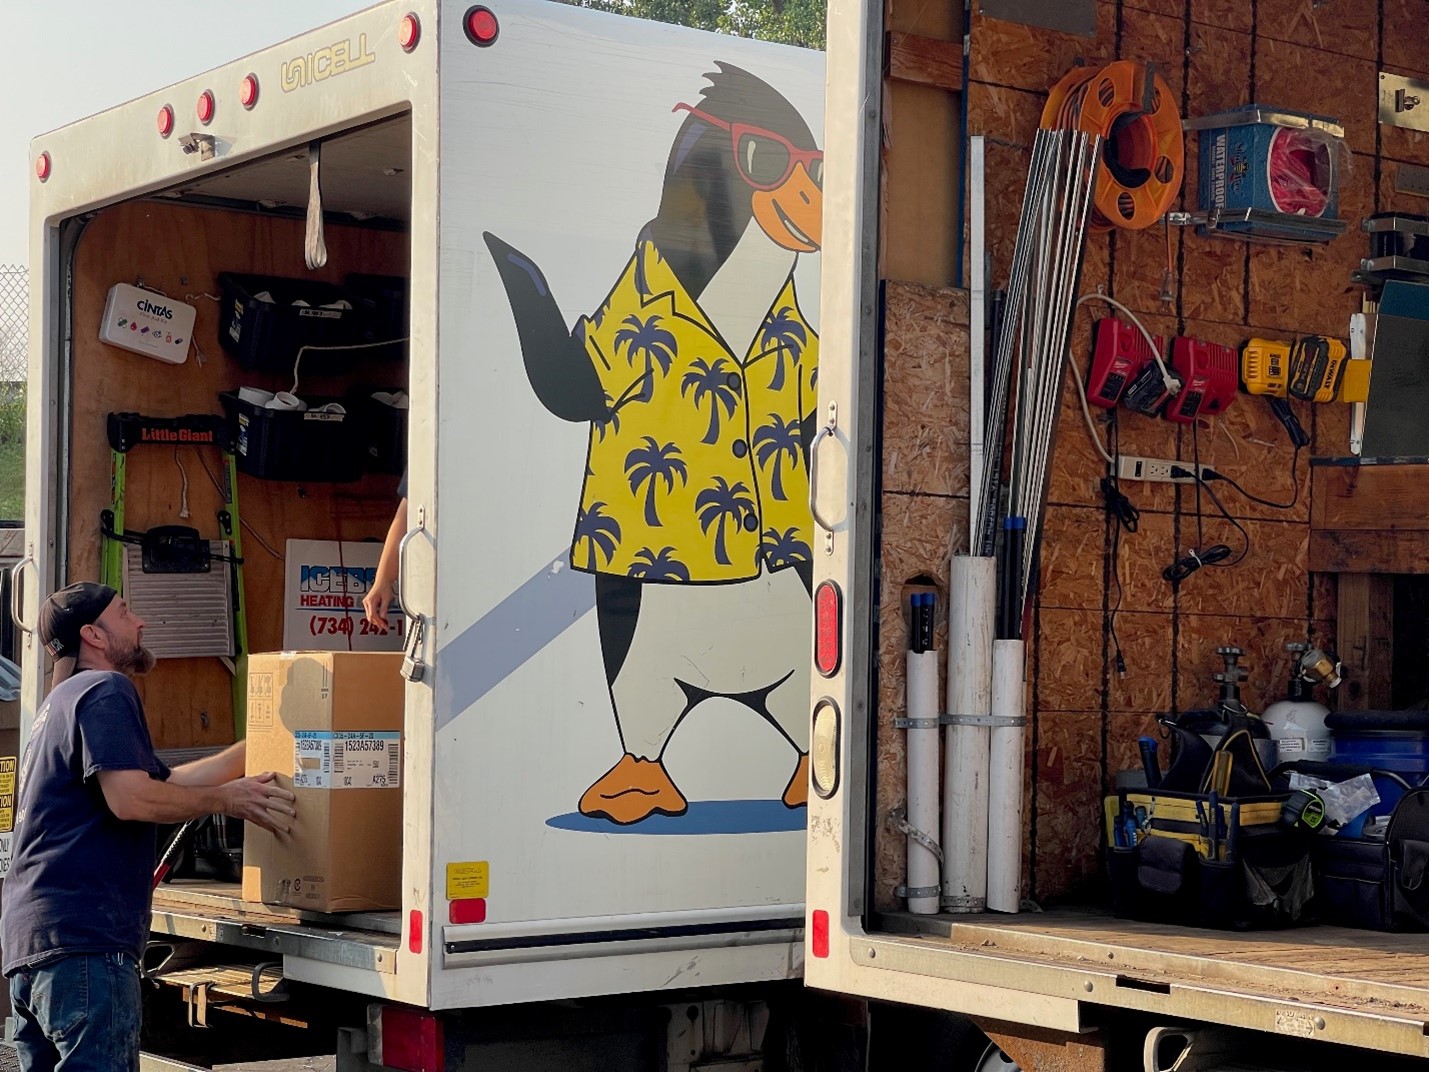 Iceberg Heating & Cooling technician unloading a truck with the image of the Iceberg penguin mascot